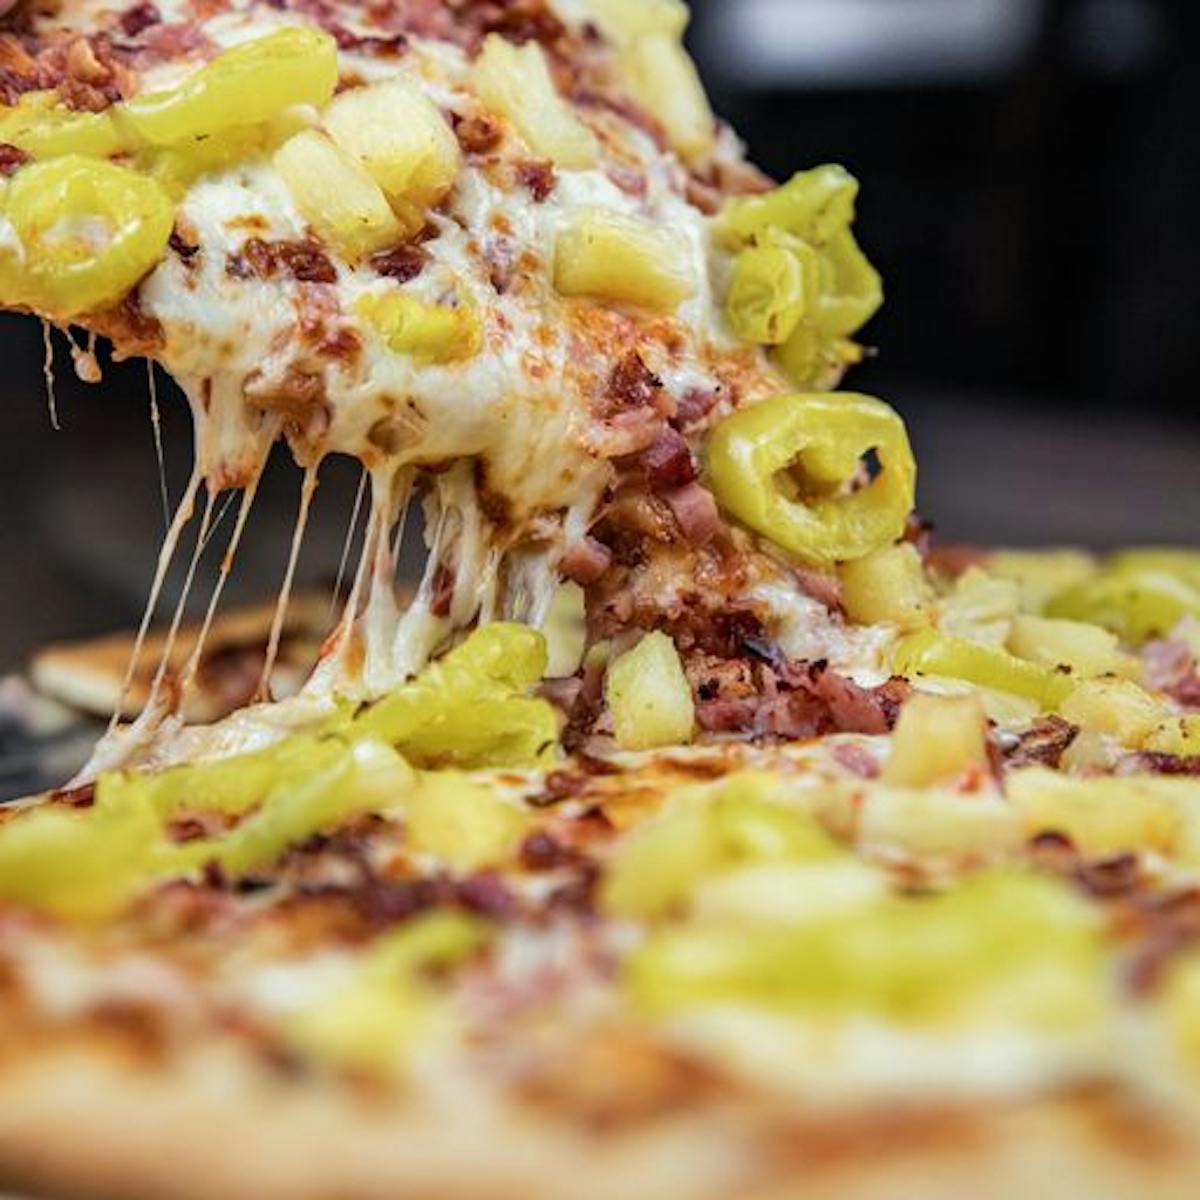 a close up image of a jalapeno and meat pizza